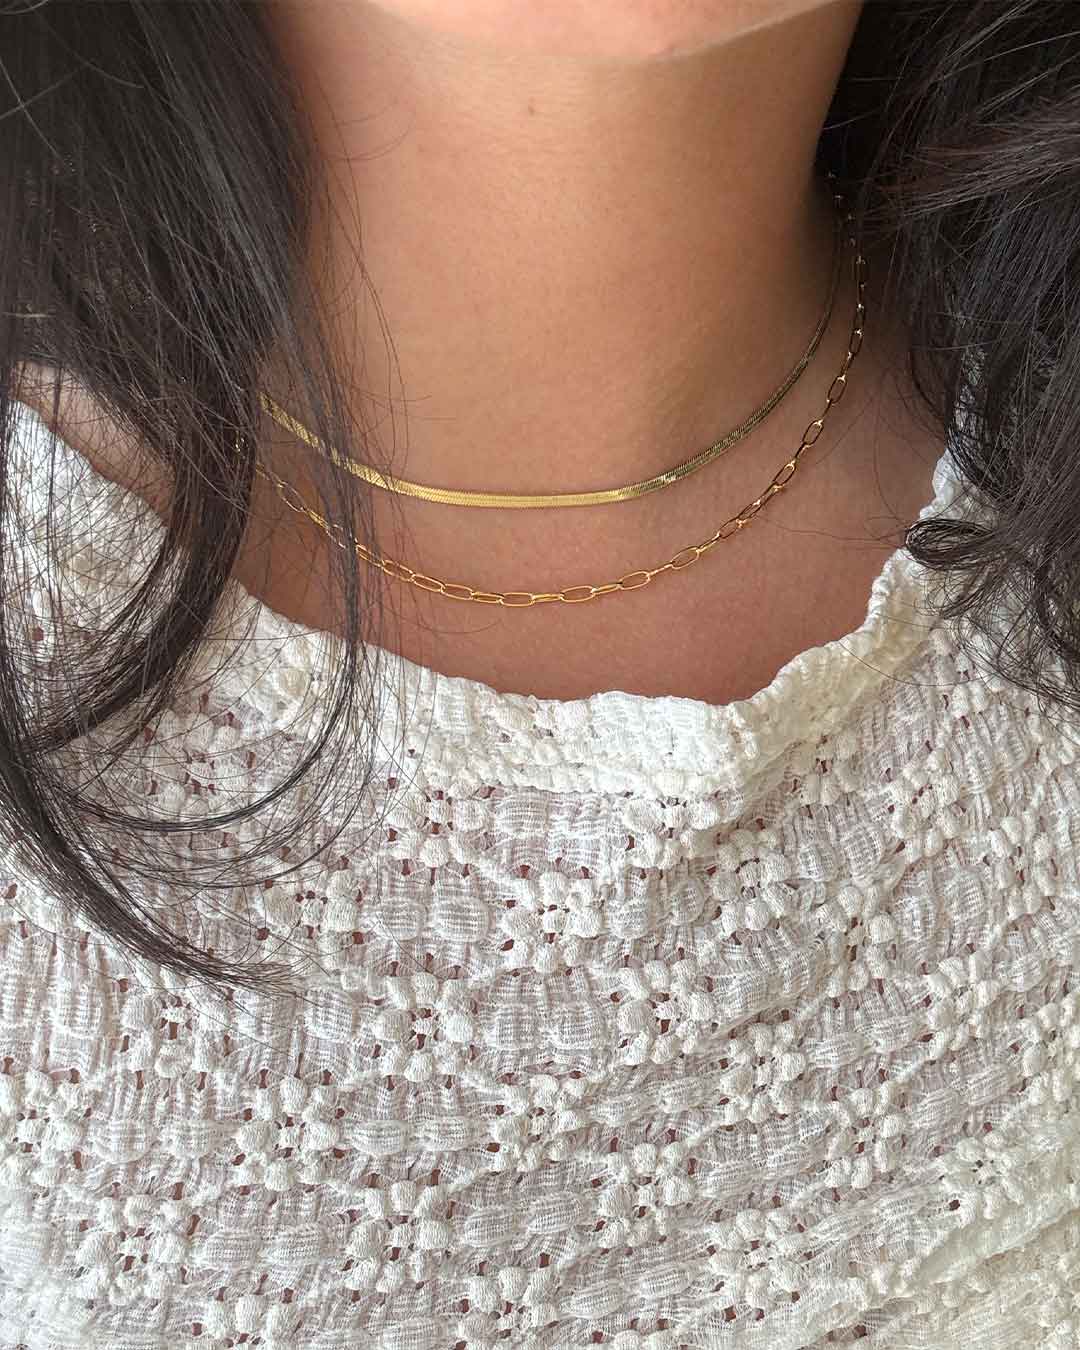 woman in gold necklaces